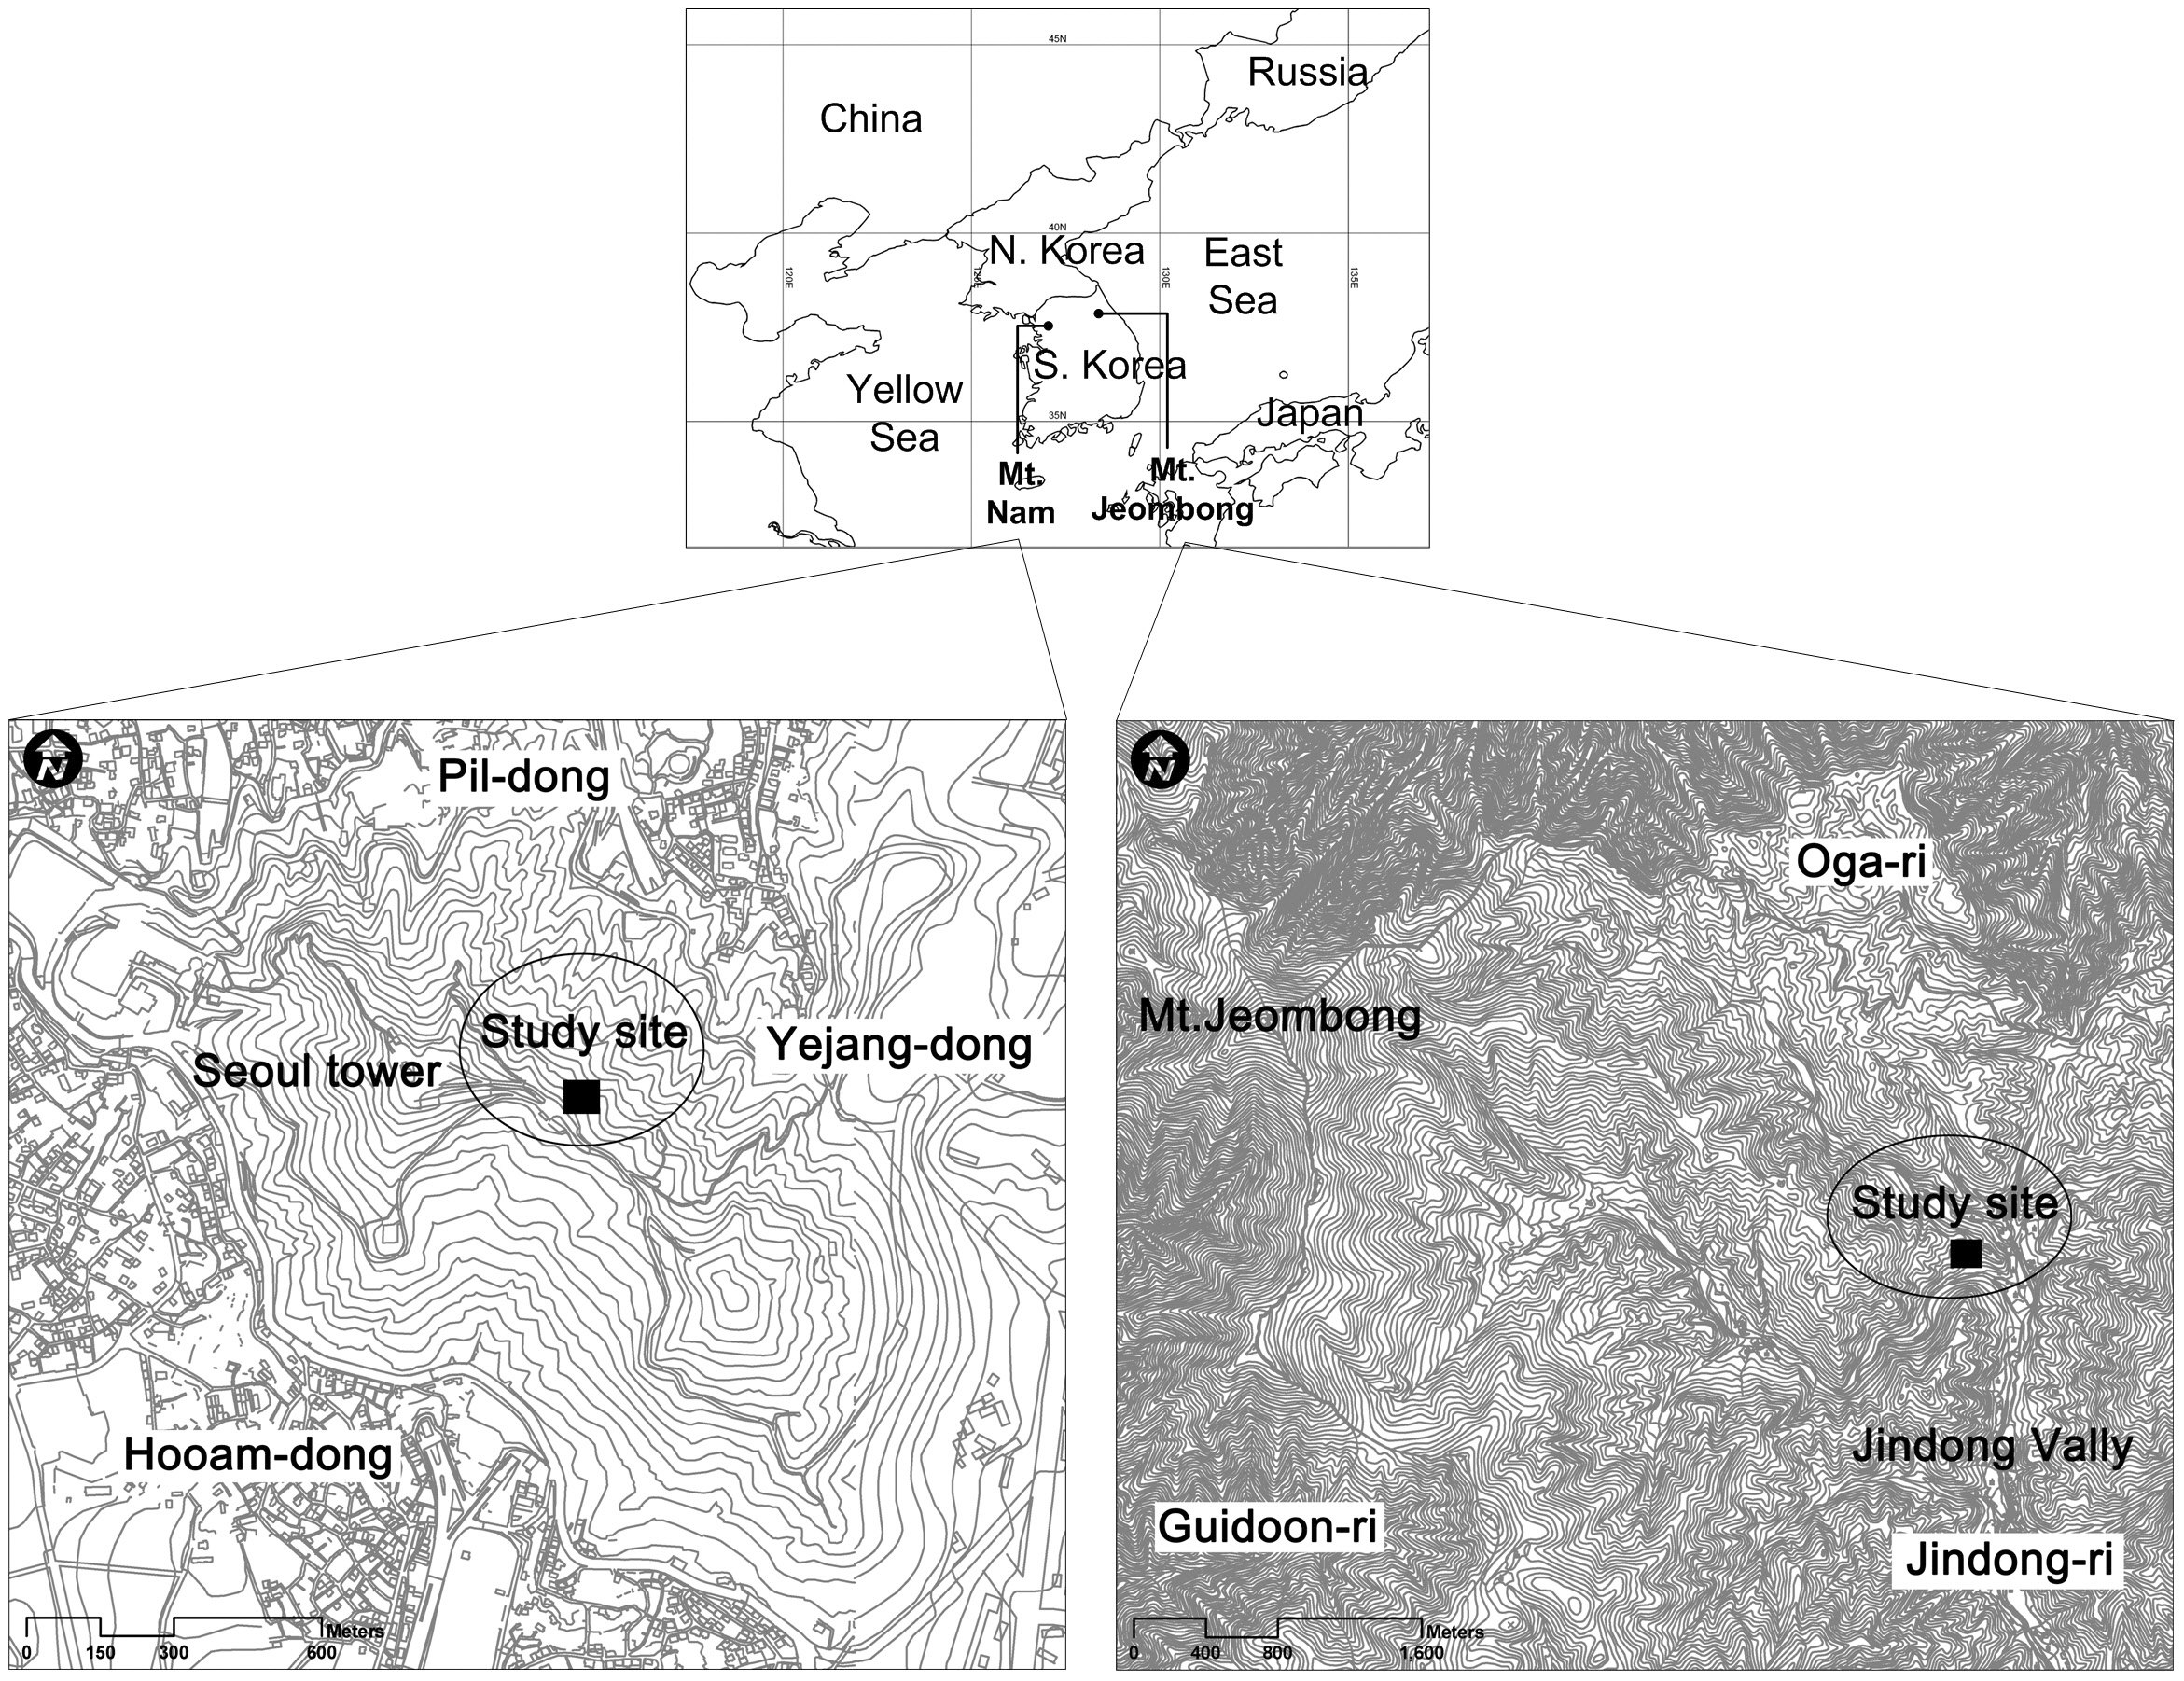 Physiognomic vegetation maps of Mts. Nam and Jeombong showing the location of study sites.